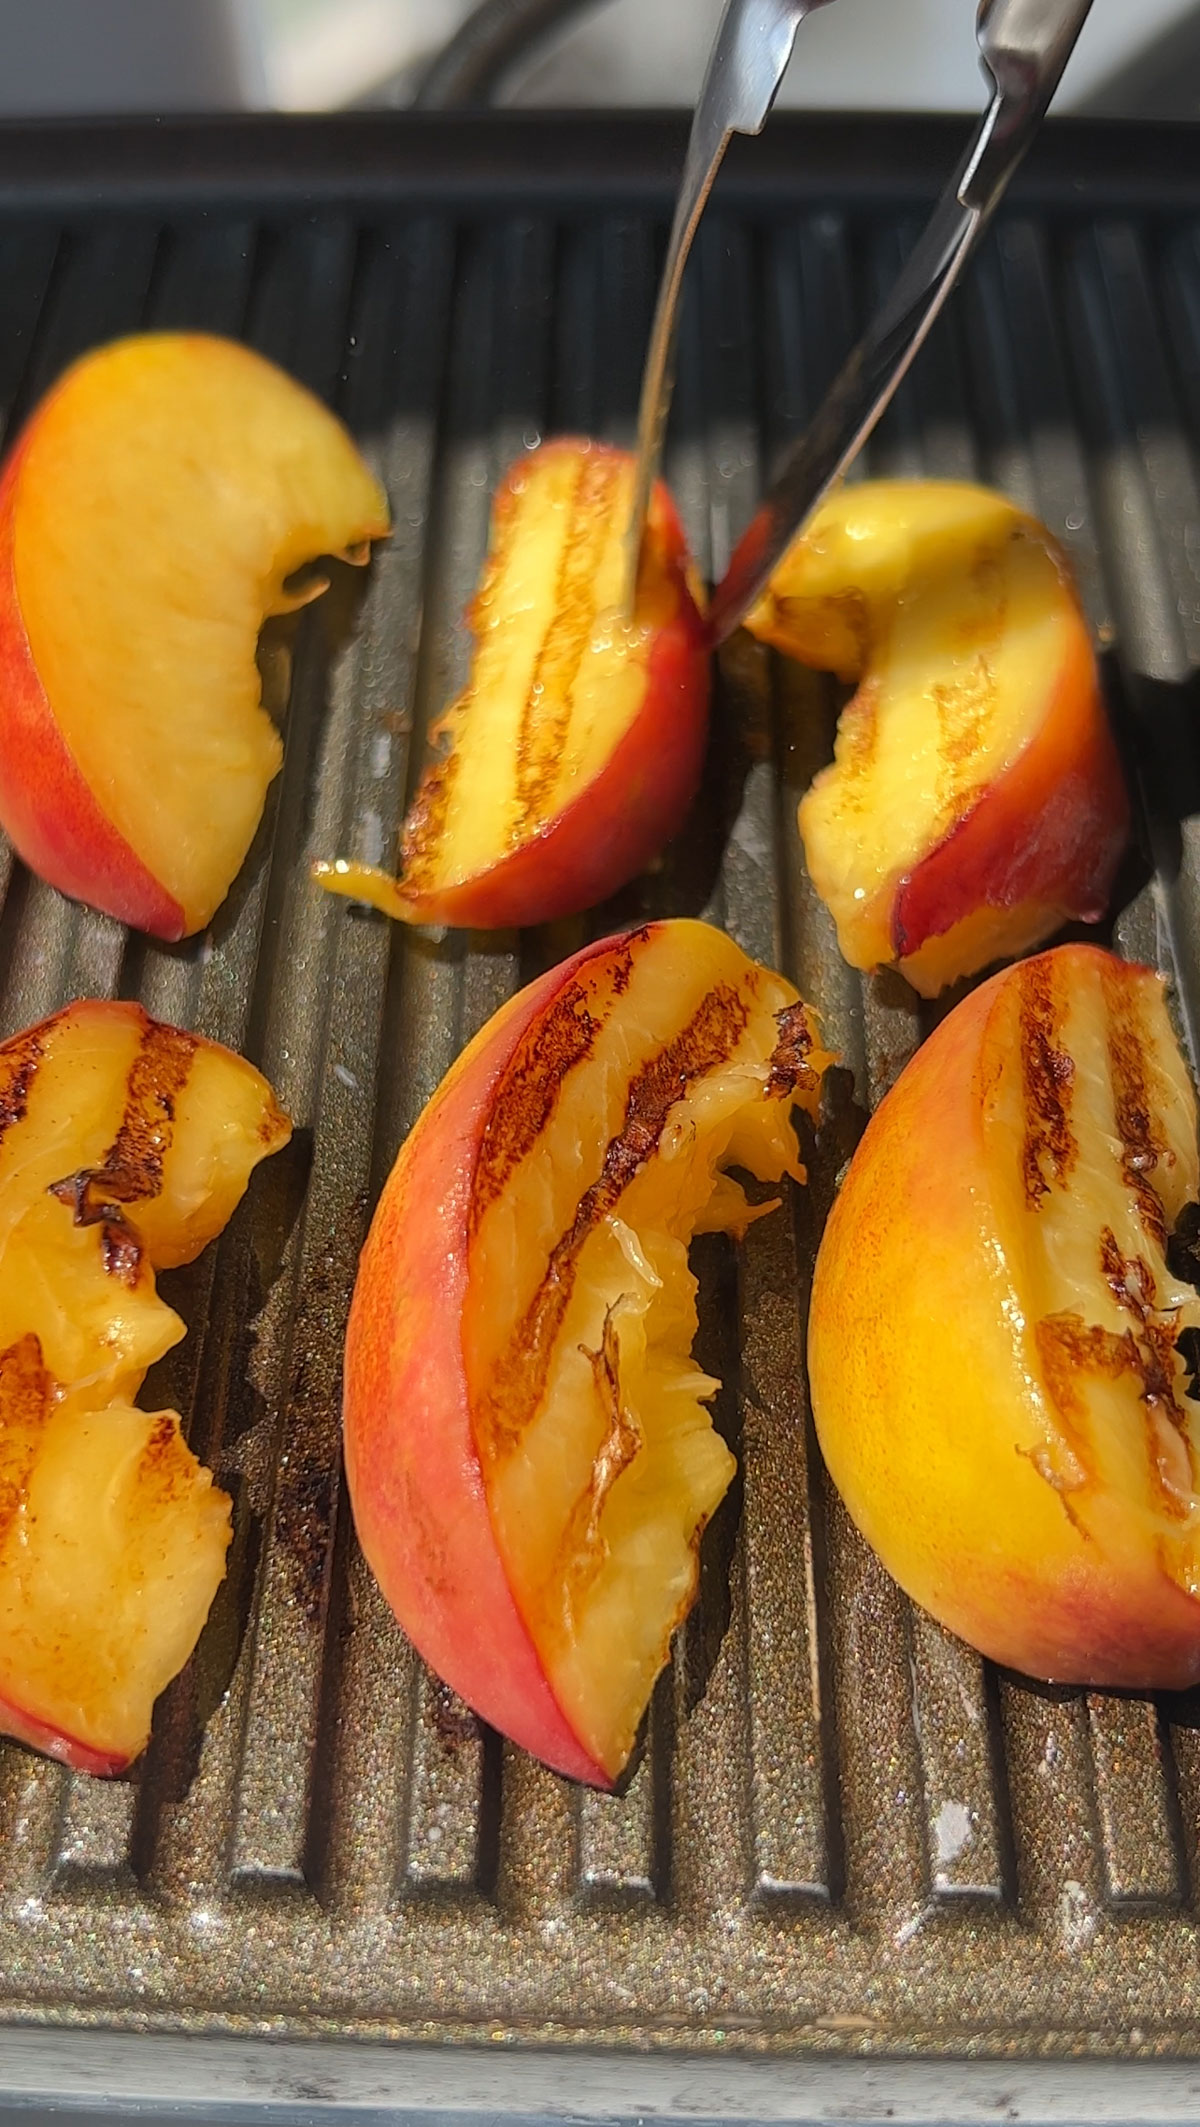 Grilling the peaches for a peach salad.